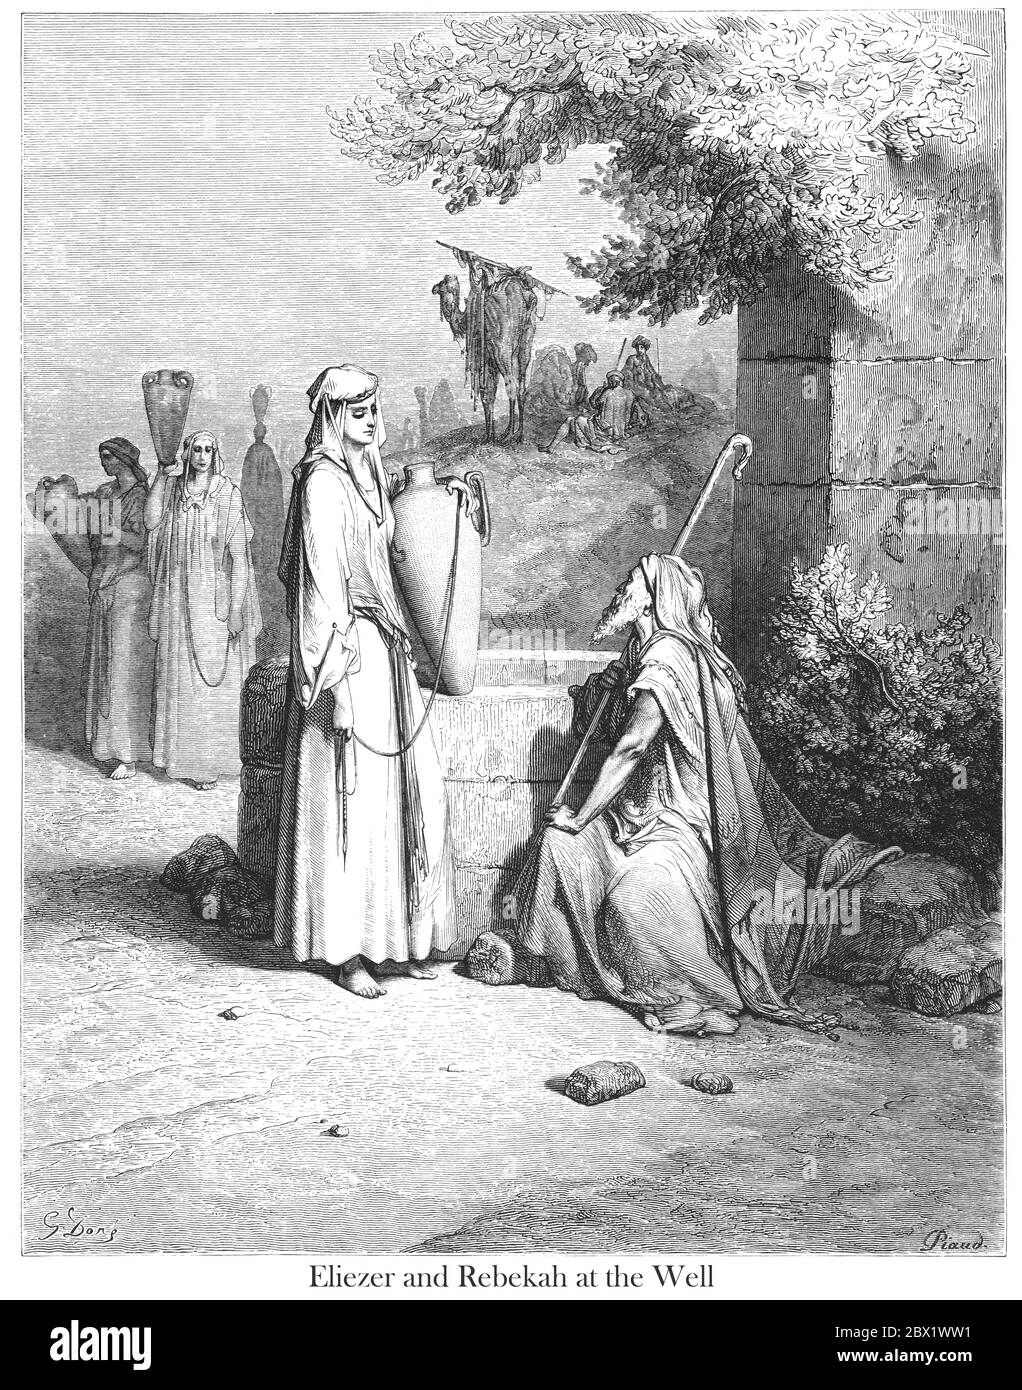 Eliezer and Rebekah meet at the well Genesis 24:16 From the book 'Bible Gallery' Illustrated by Gustave Dore with Memoir of Doré and Descriptive Letter-press by Talbot W. Chambers D.D. Published by Cassell & Company Limited in London and simultaneously by Mame in Tours, France in 1866 Stock Photo